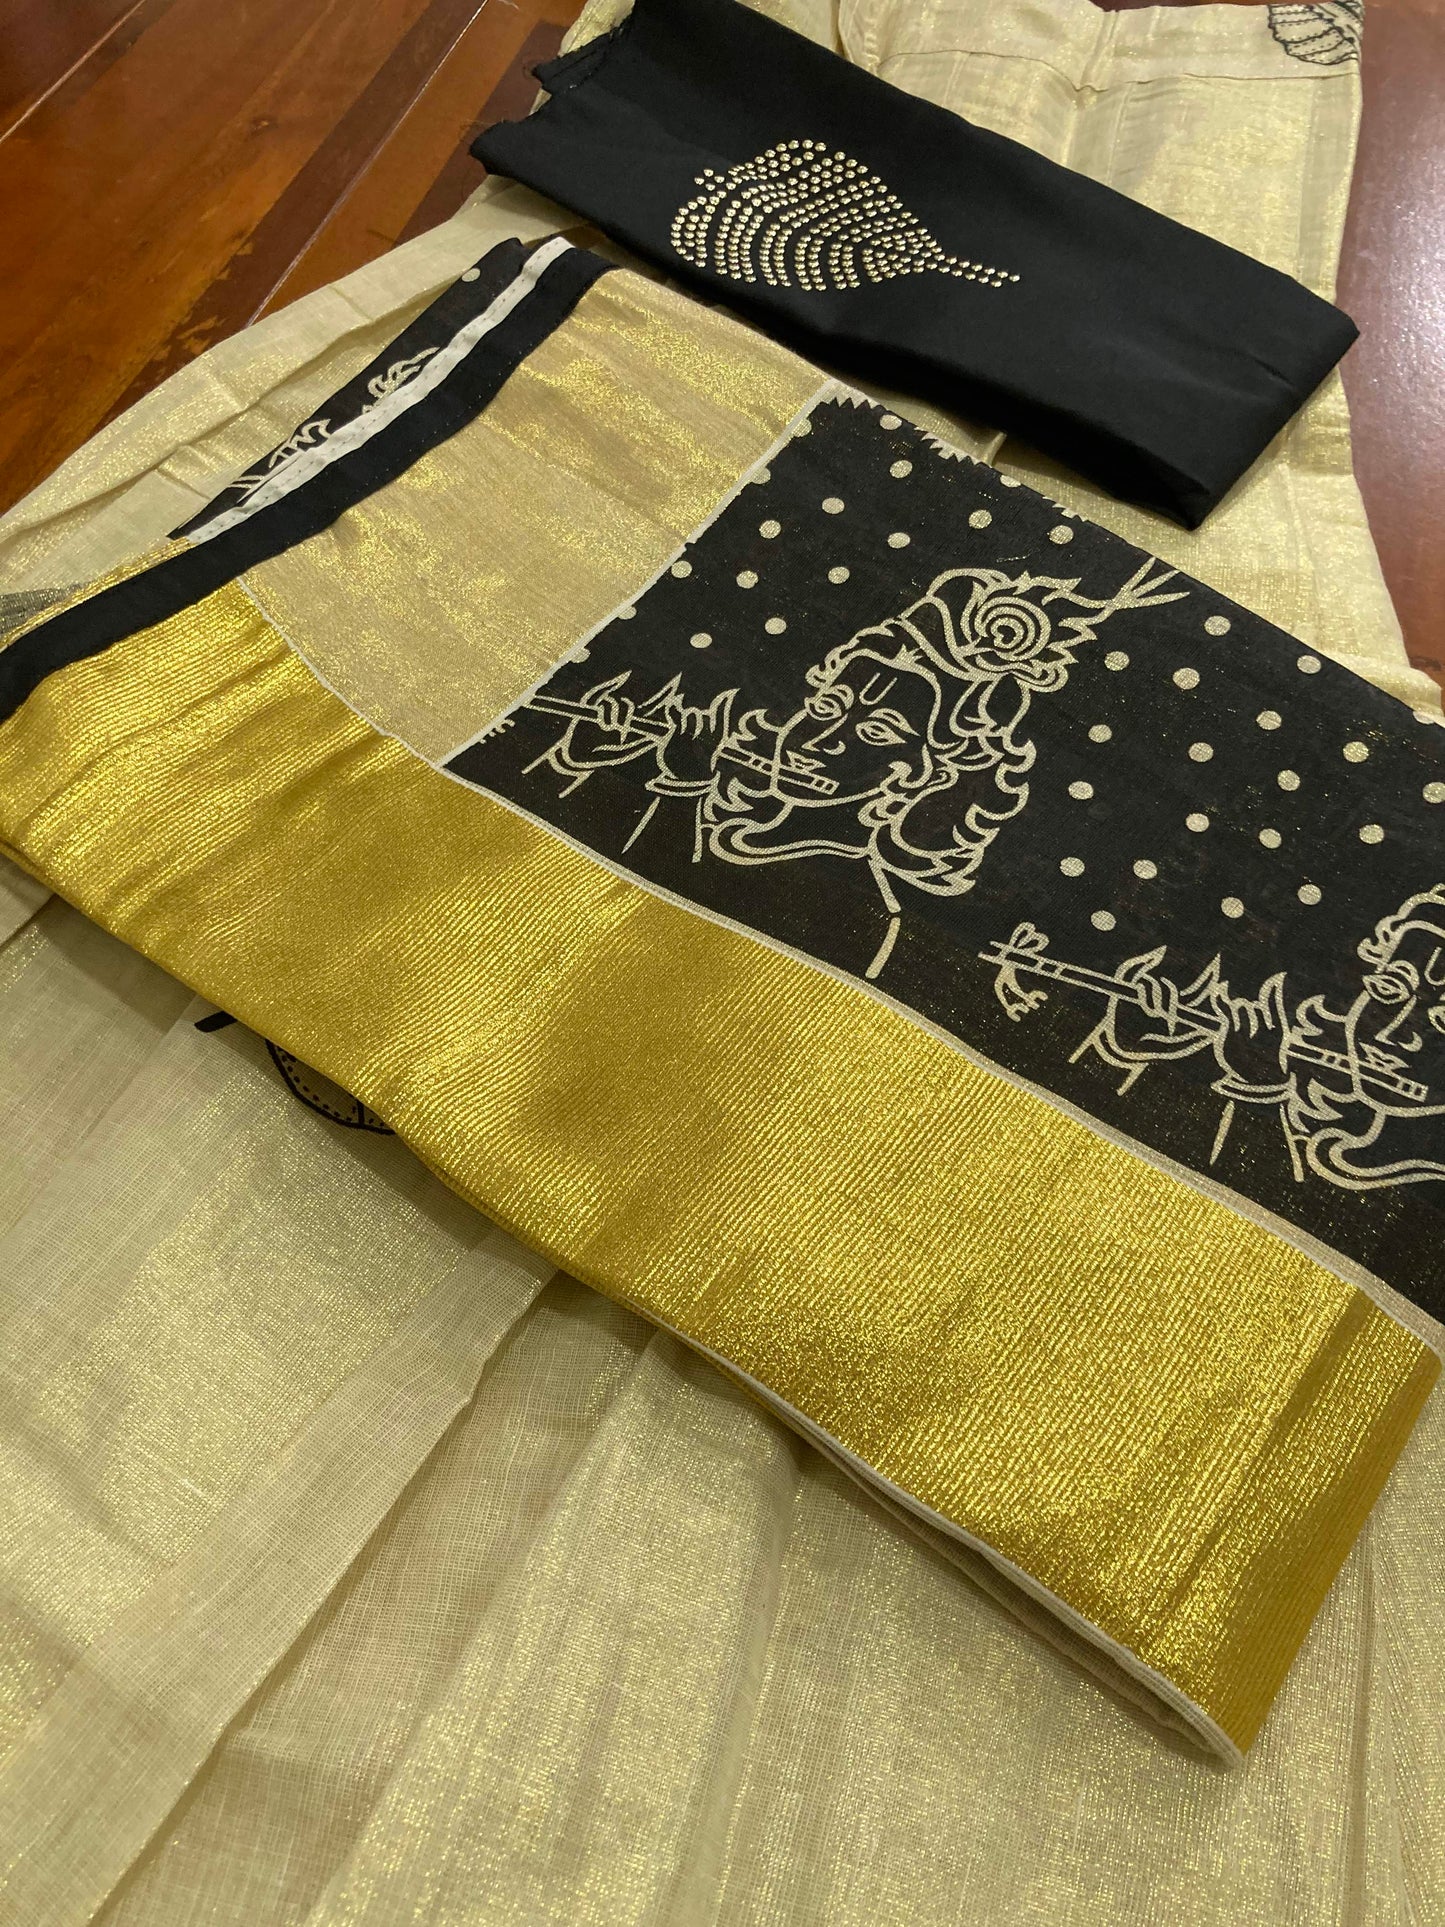 Kerala Tissue Stitched Dhavani Set with Blouse Piece and Neriyathu in with Black Accents and Mural Designs